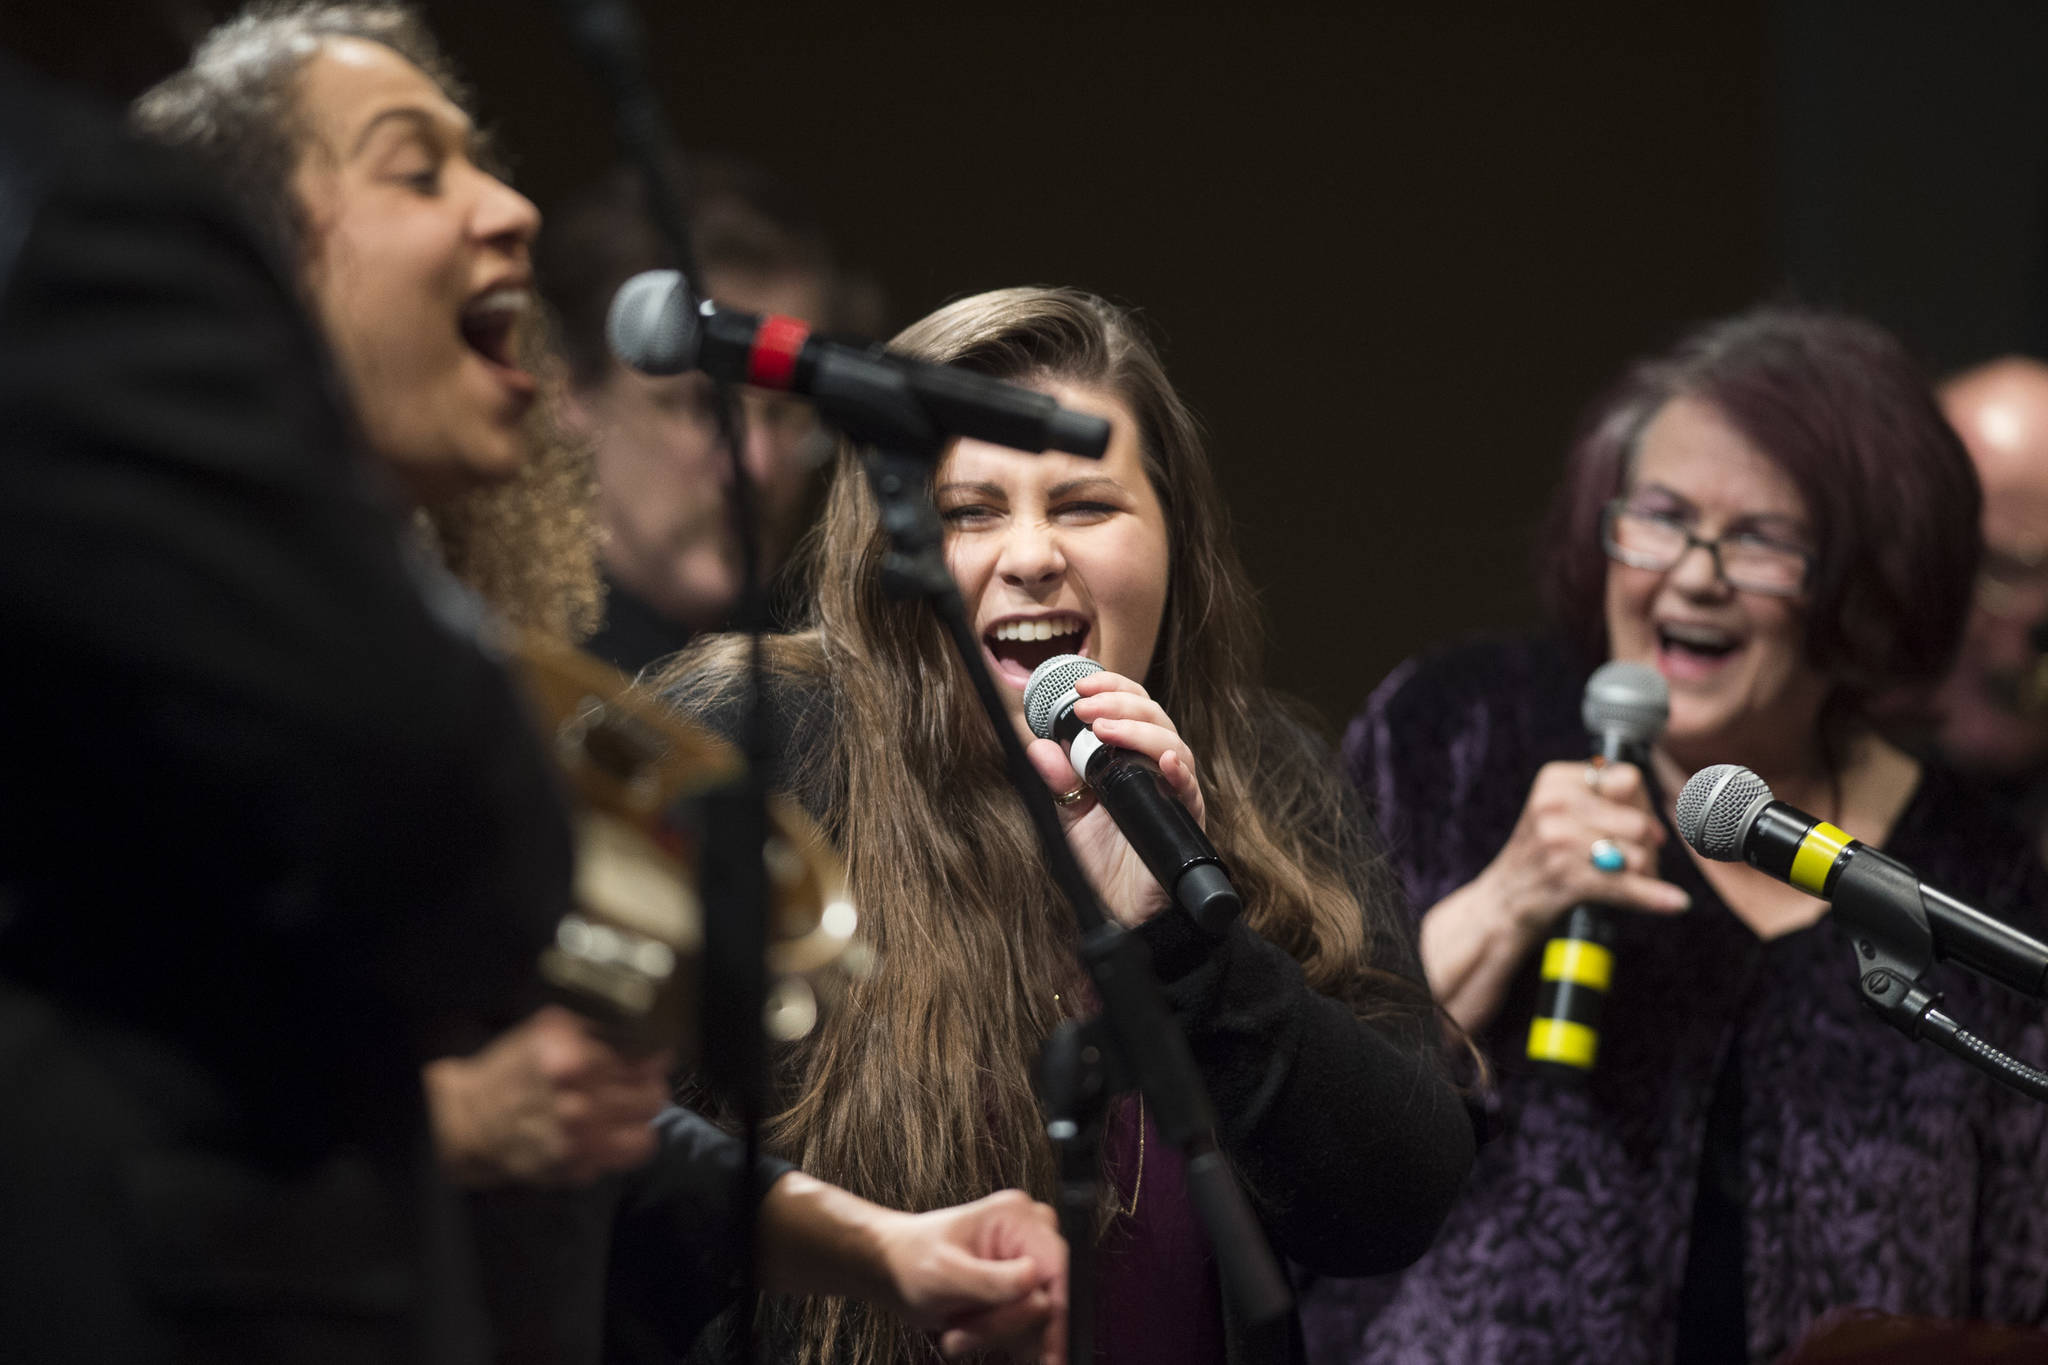 Alyssa Fischer, center, sings during a performance of “Motown for Our Town” featuring Ryan Shaw, Bobby Lewis, Eustace Johnson, Jaunelle Celaire others at the Juneau Arts & Culture Center on Friday, March 1, 2019. (Michael Penn | Juneau Empire)